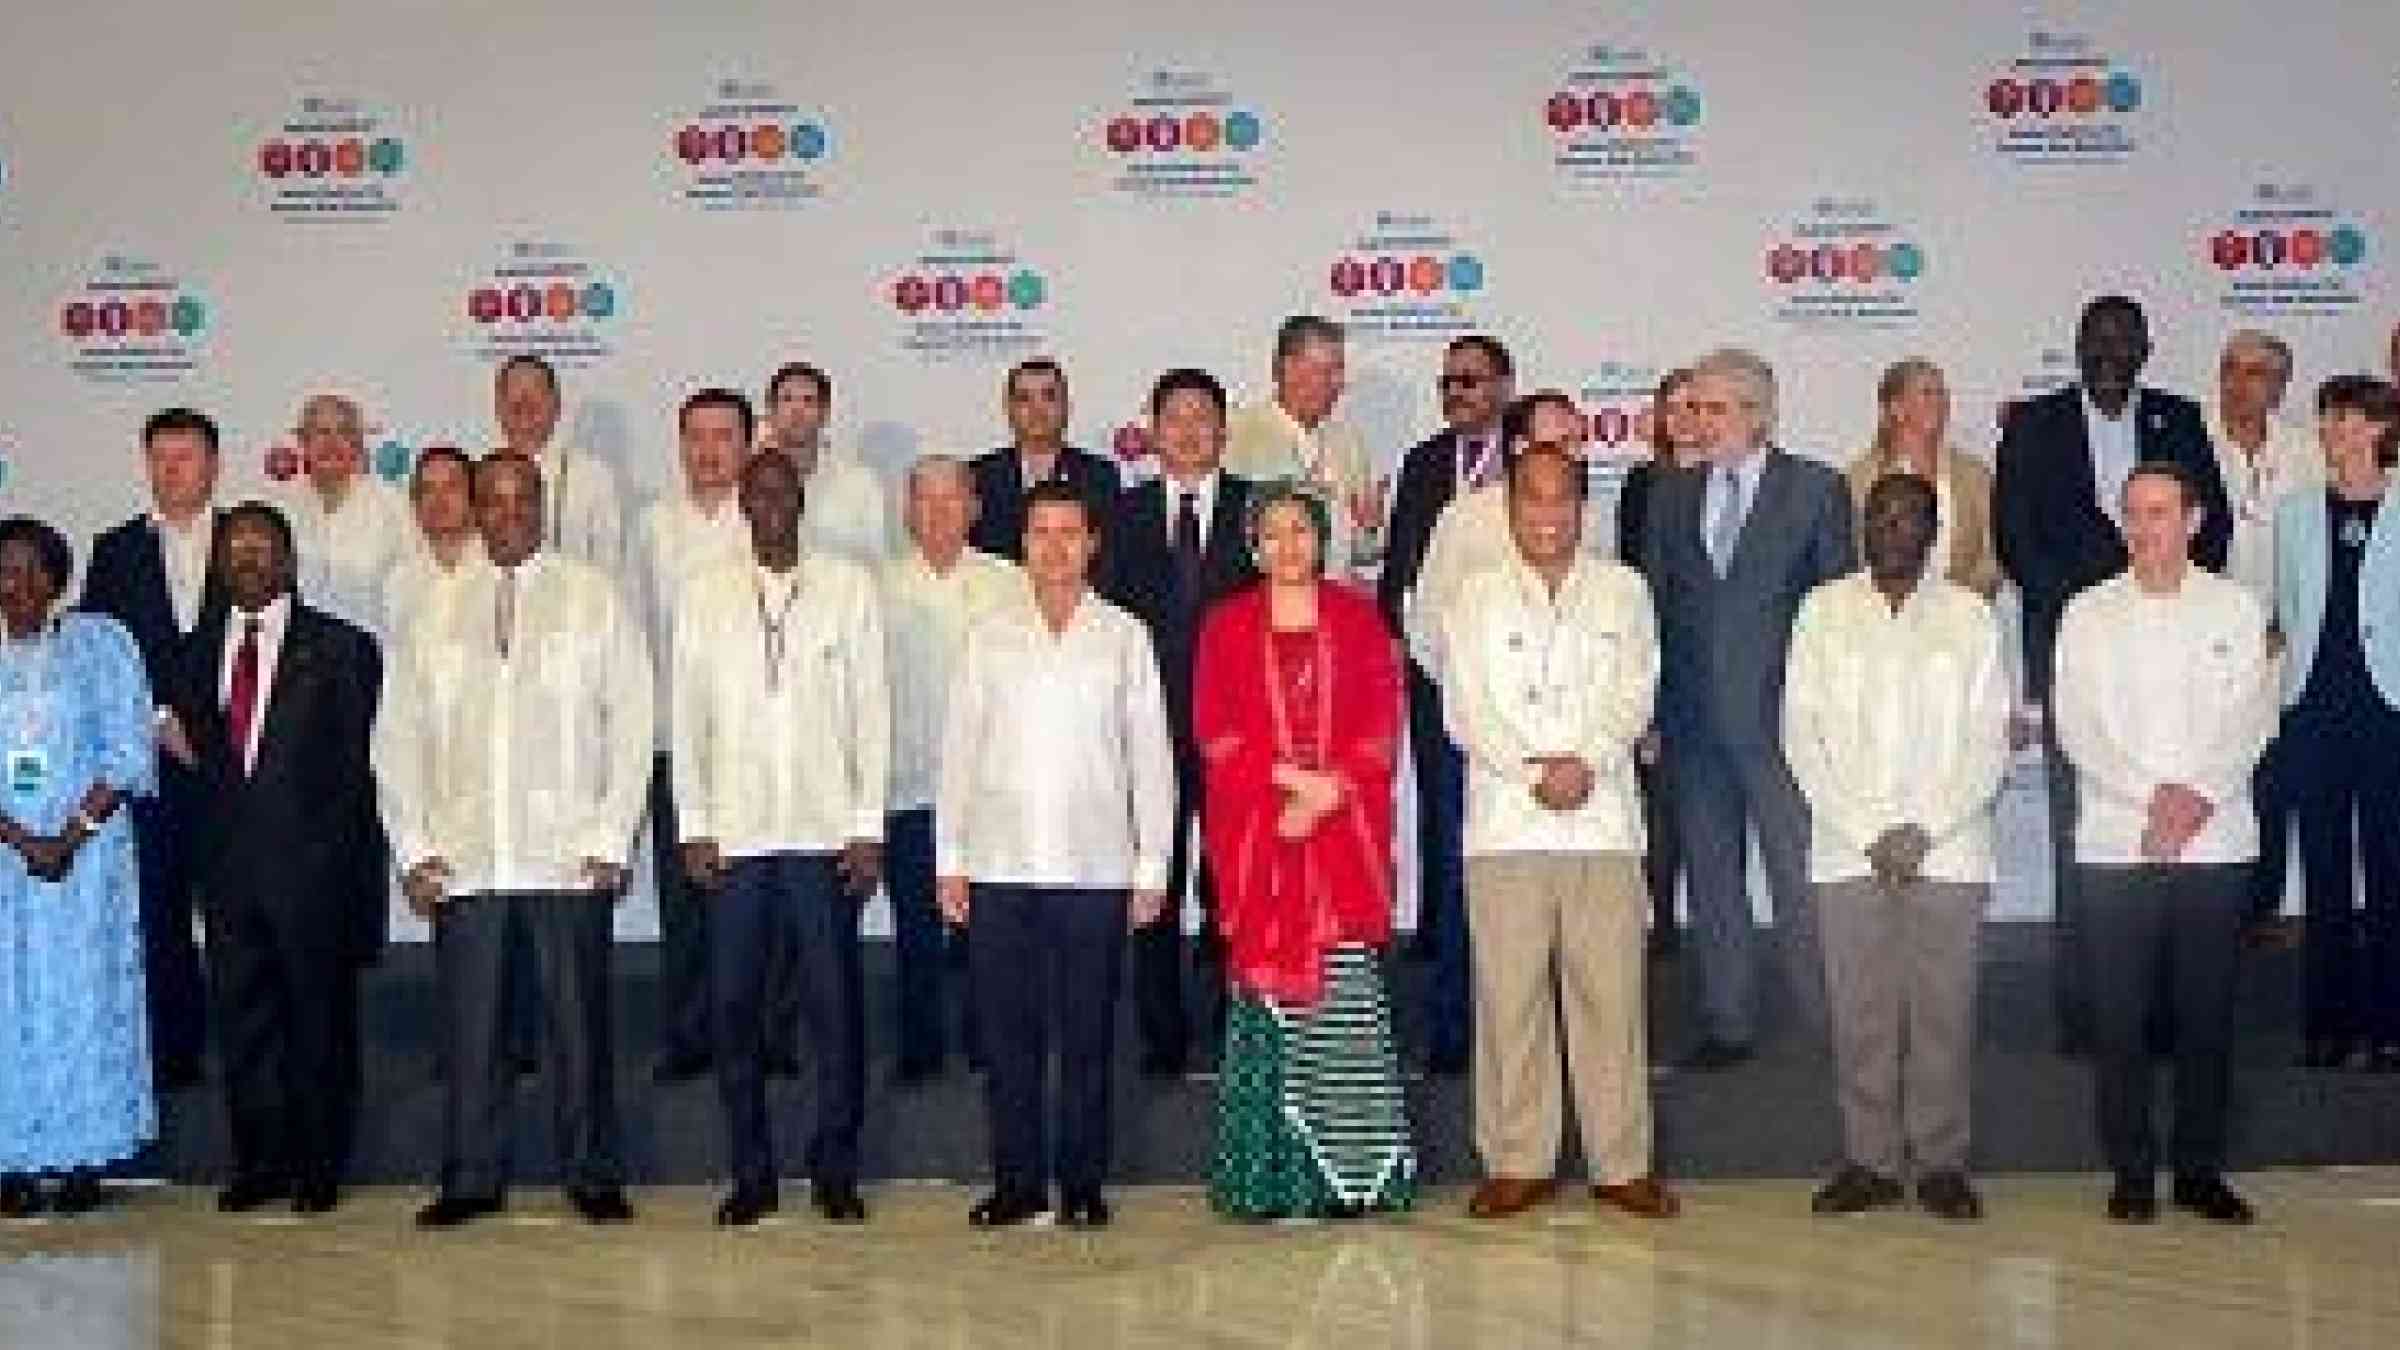 H.E. Mr. Enrique Peña Nieto, the President of Mexico (fourth from left) and Ms. Amina J. Mohammed, Deputy Secretary-General of the United Nations (fifth from left) during the opening ceremony of the Global Platform for Disaster Risk Reduction 2017 (photo: UNISDR)